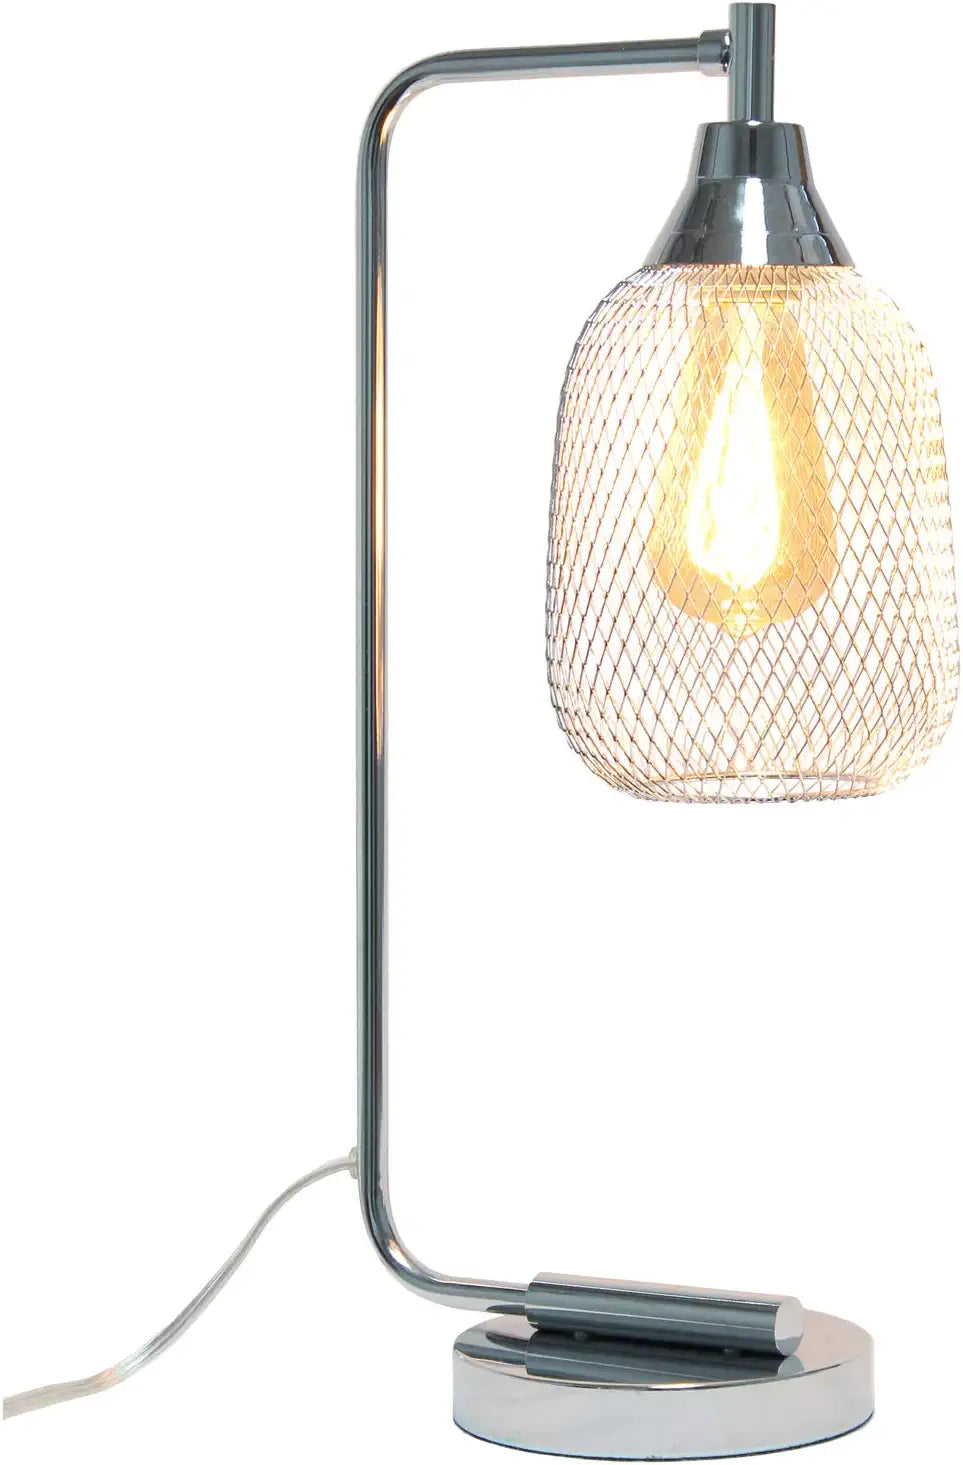 Lalia Home Industrial Office Desk Lamp with Wired Mesh Shade and Polished Chrome Finish